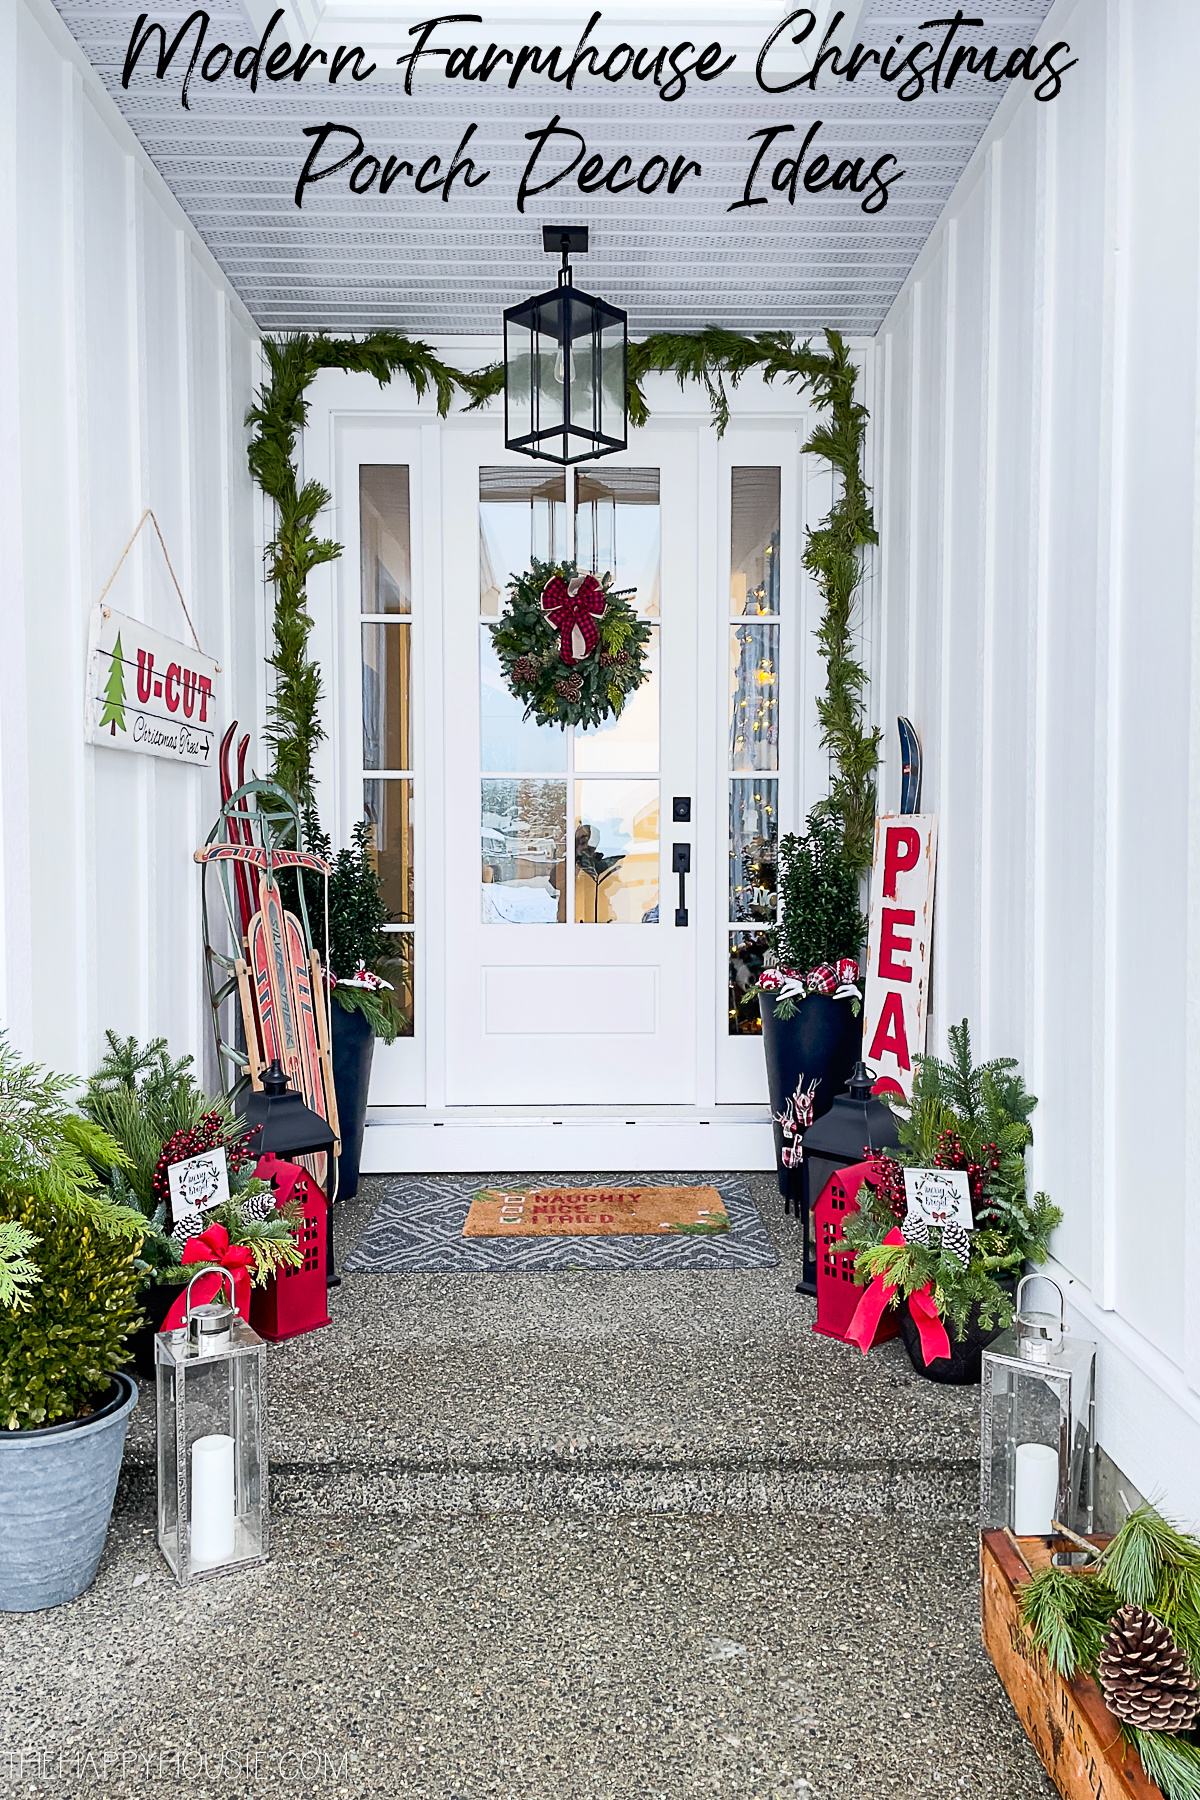 Modern farmhouse porch decorated for Christmas.